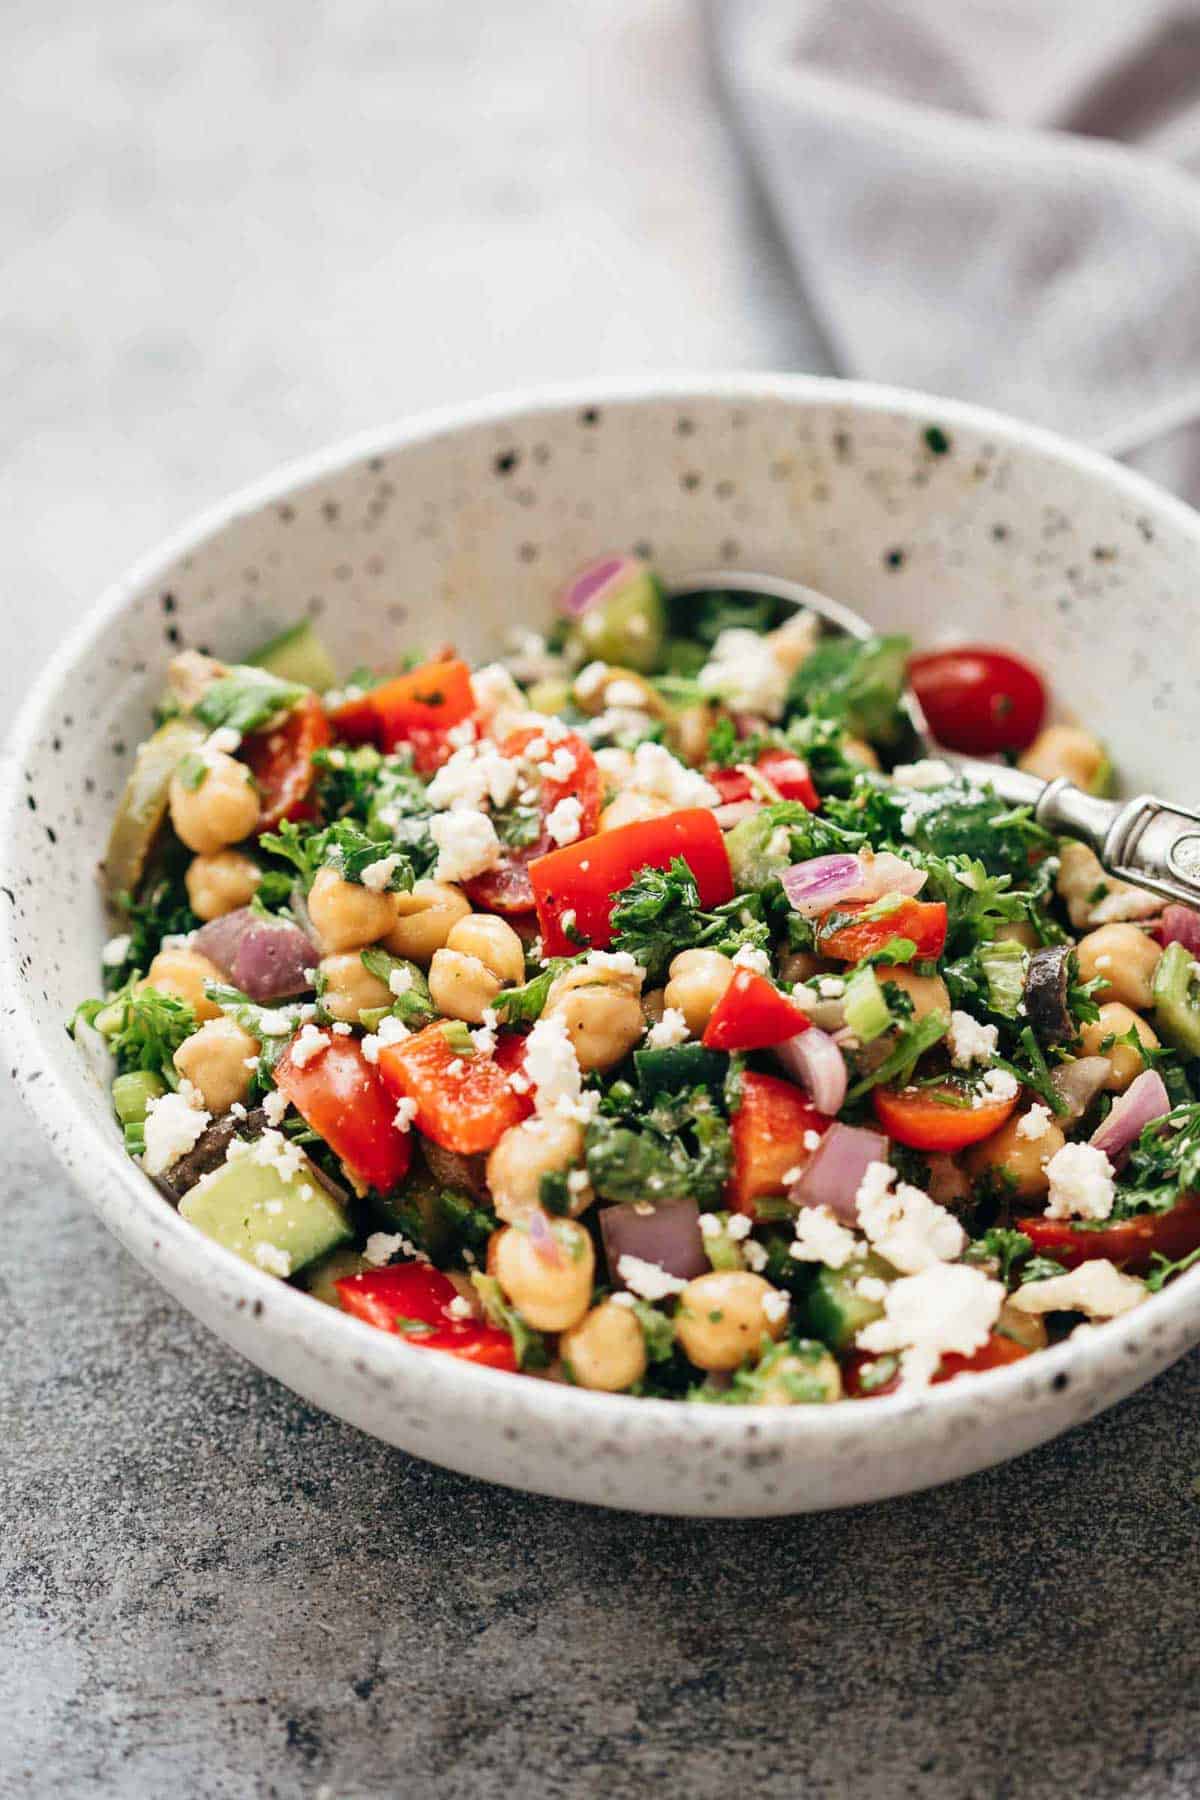 Easy Mediterranean chickpea salad served in a ceramic bowl with a spoon